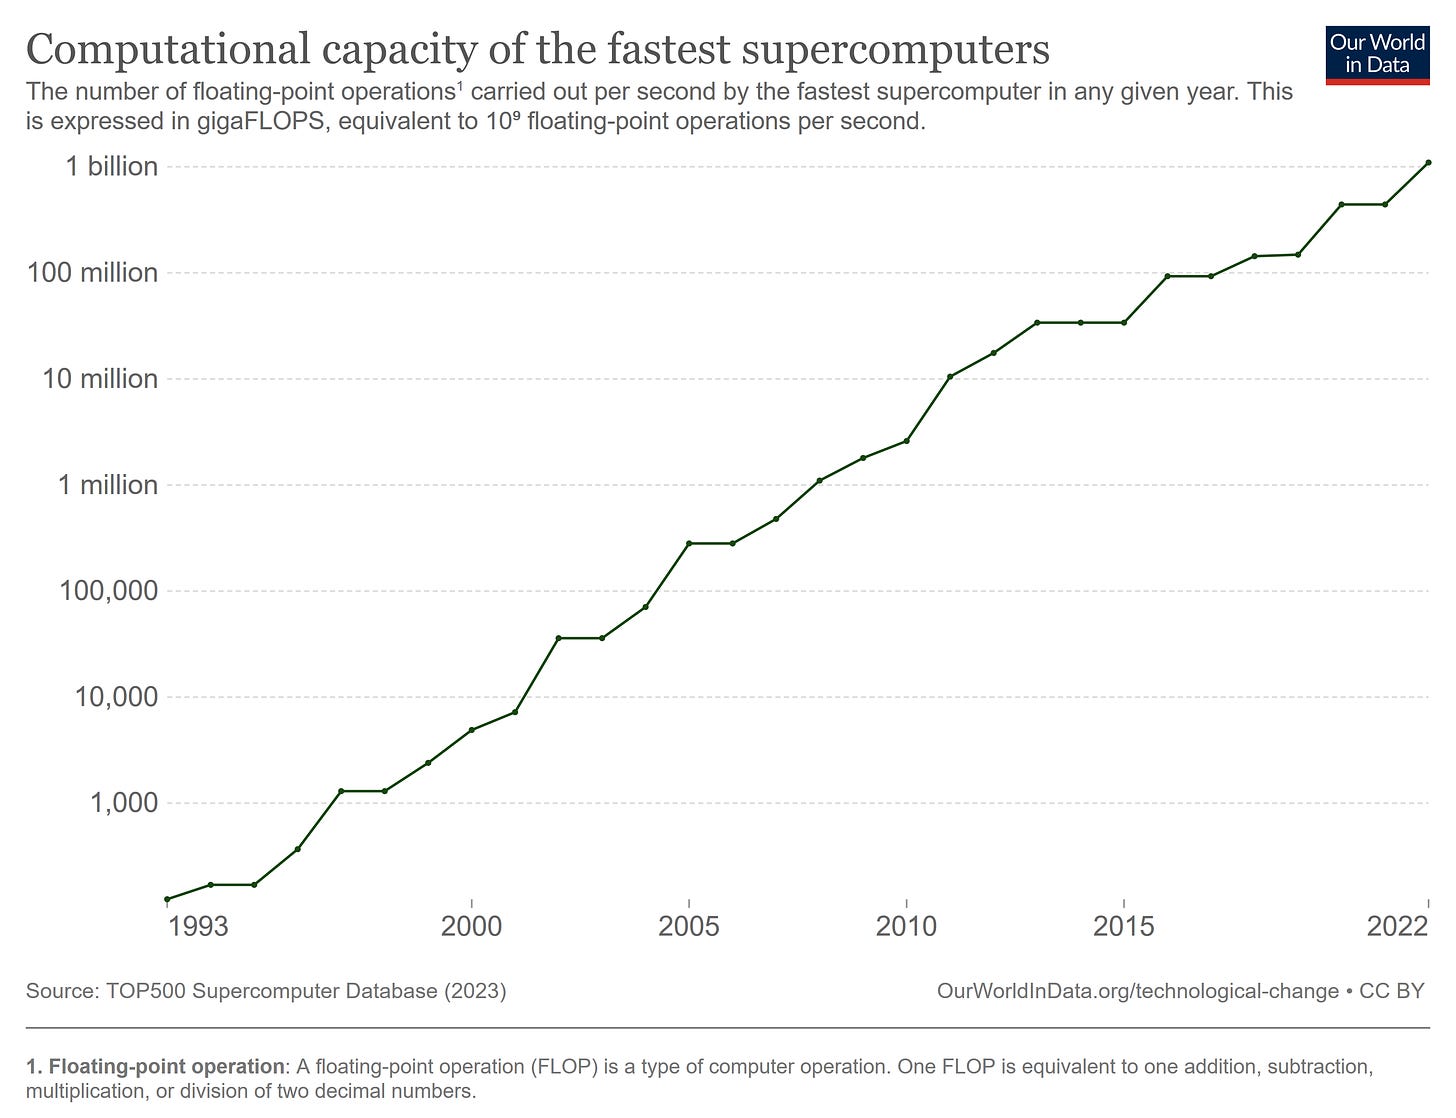 A chart of computational capacity of the fastest supercomputers over time. The increase is exponential.